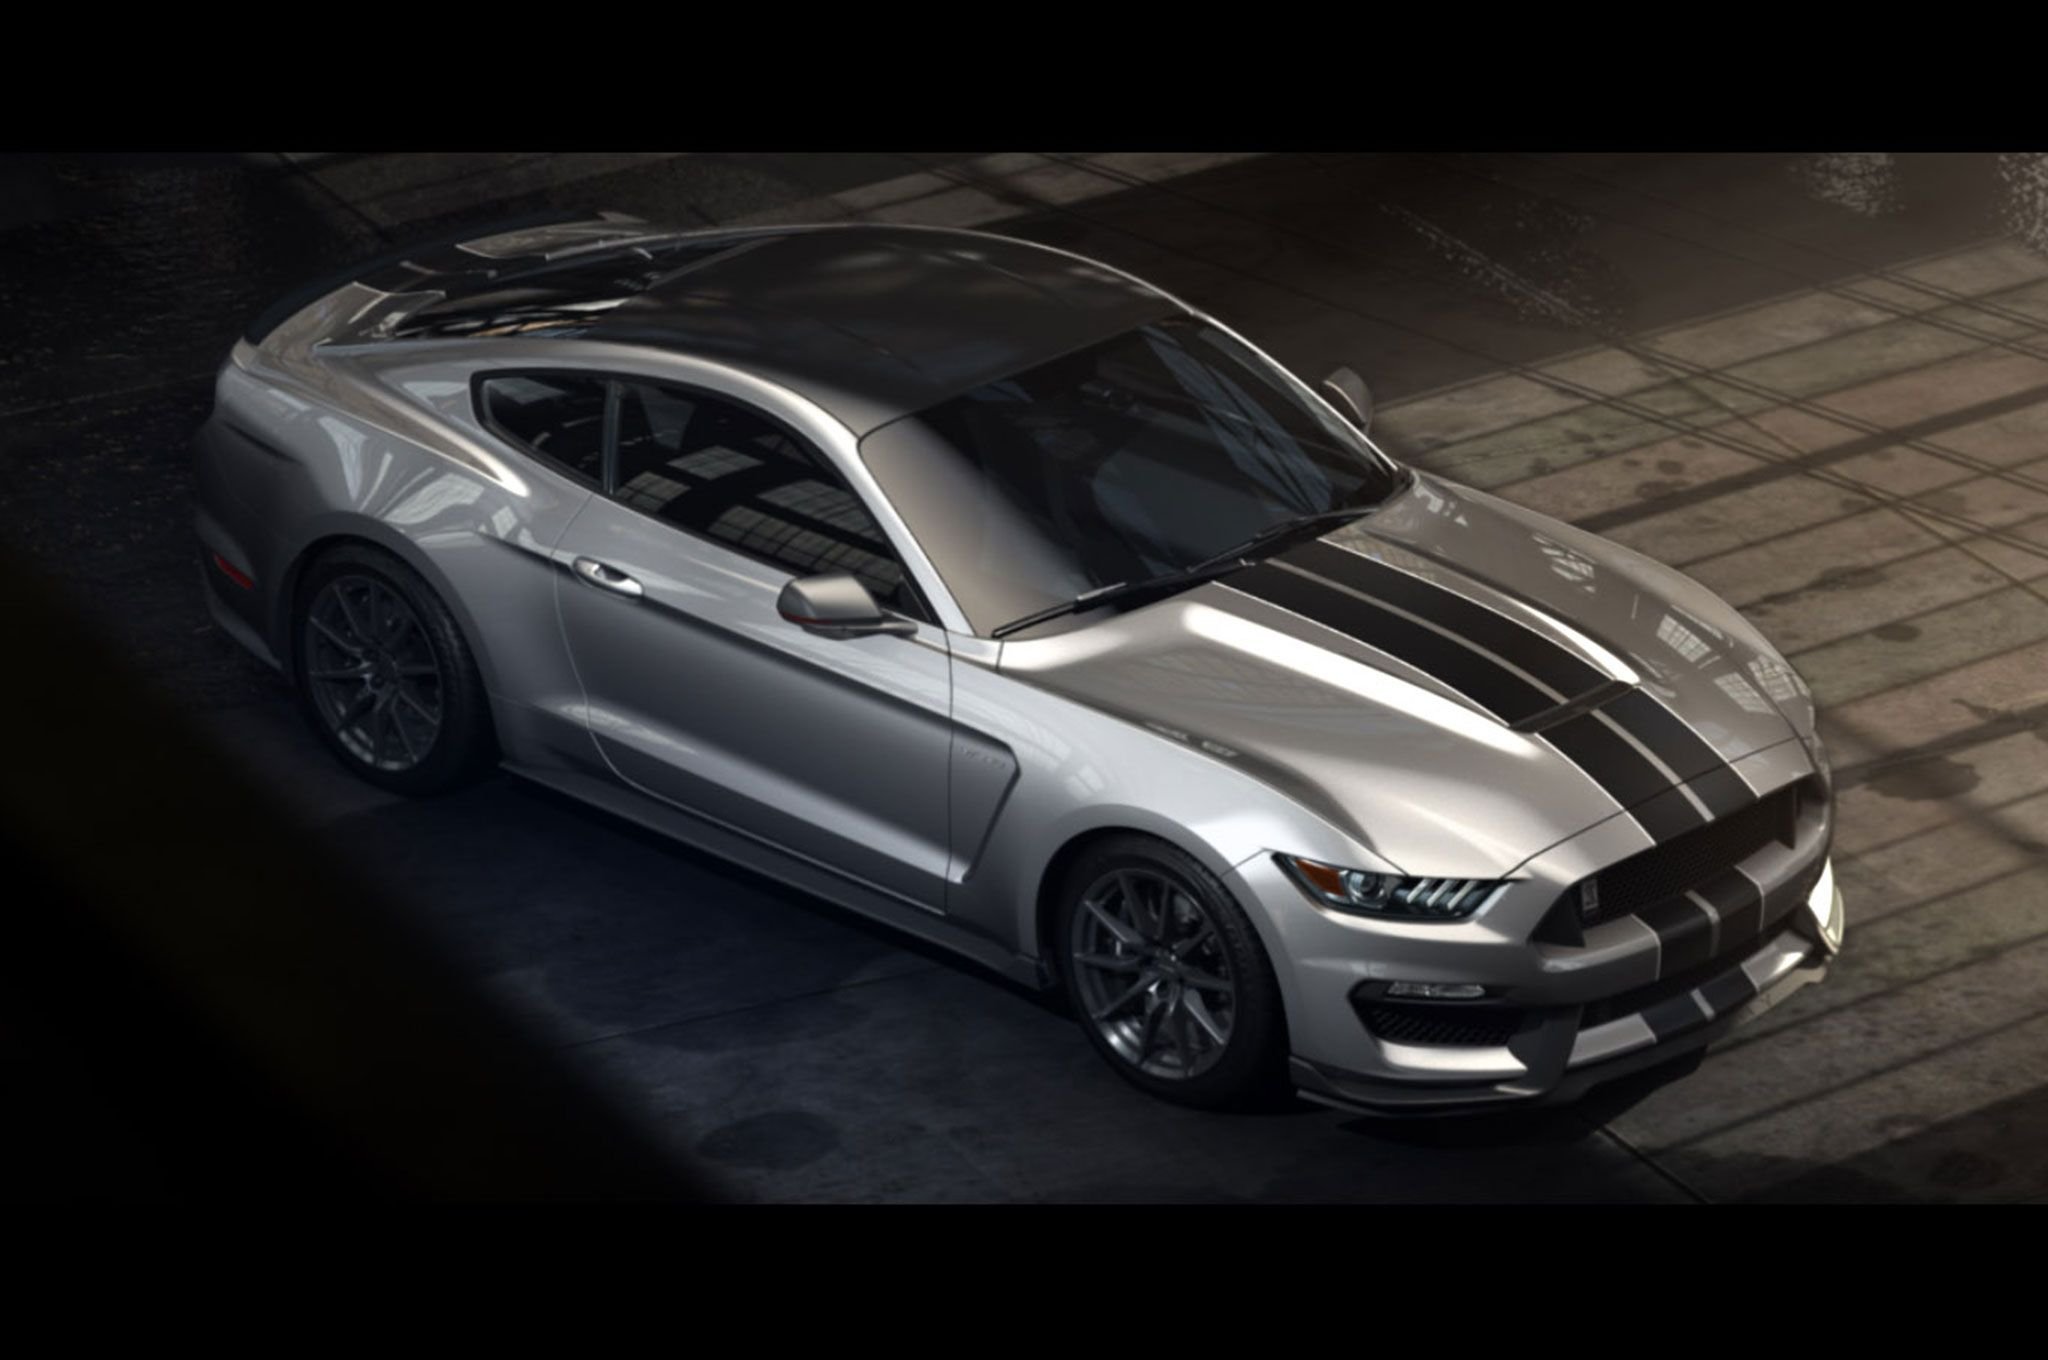 2015, Ford, Mustang, Shelby, Cobra, Gt, 350, Muscle, Supercar, Usa, 2048x1360 03 Wallpaper